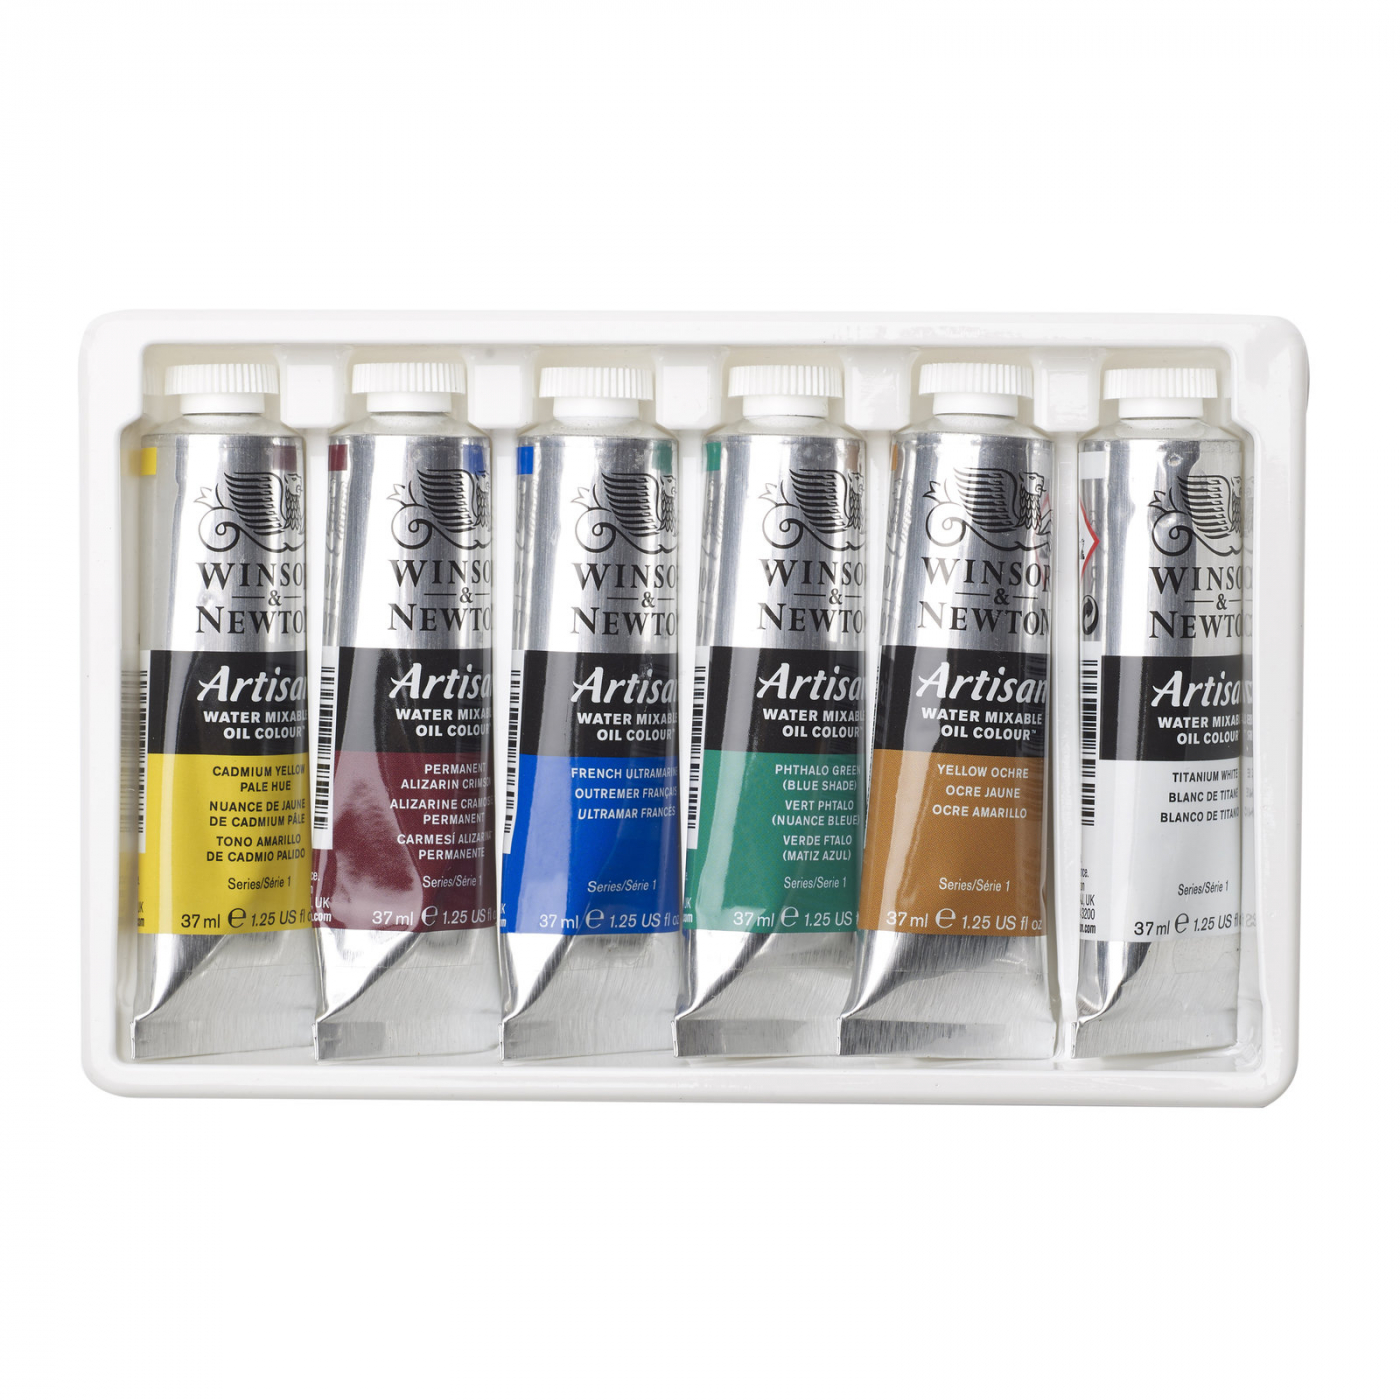 Artisan Water Mixable Oil Color Beginners 6-set 37 ml in the group Art Supplies / Colors / Oil Paint at Pen Store (107252)